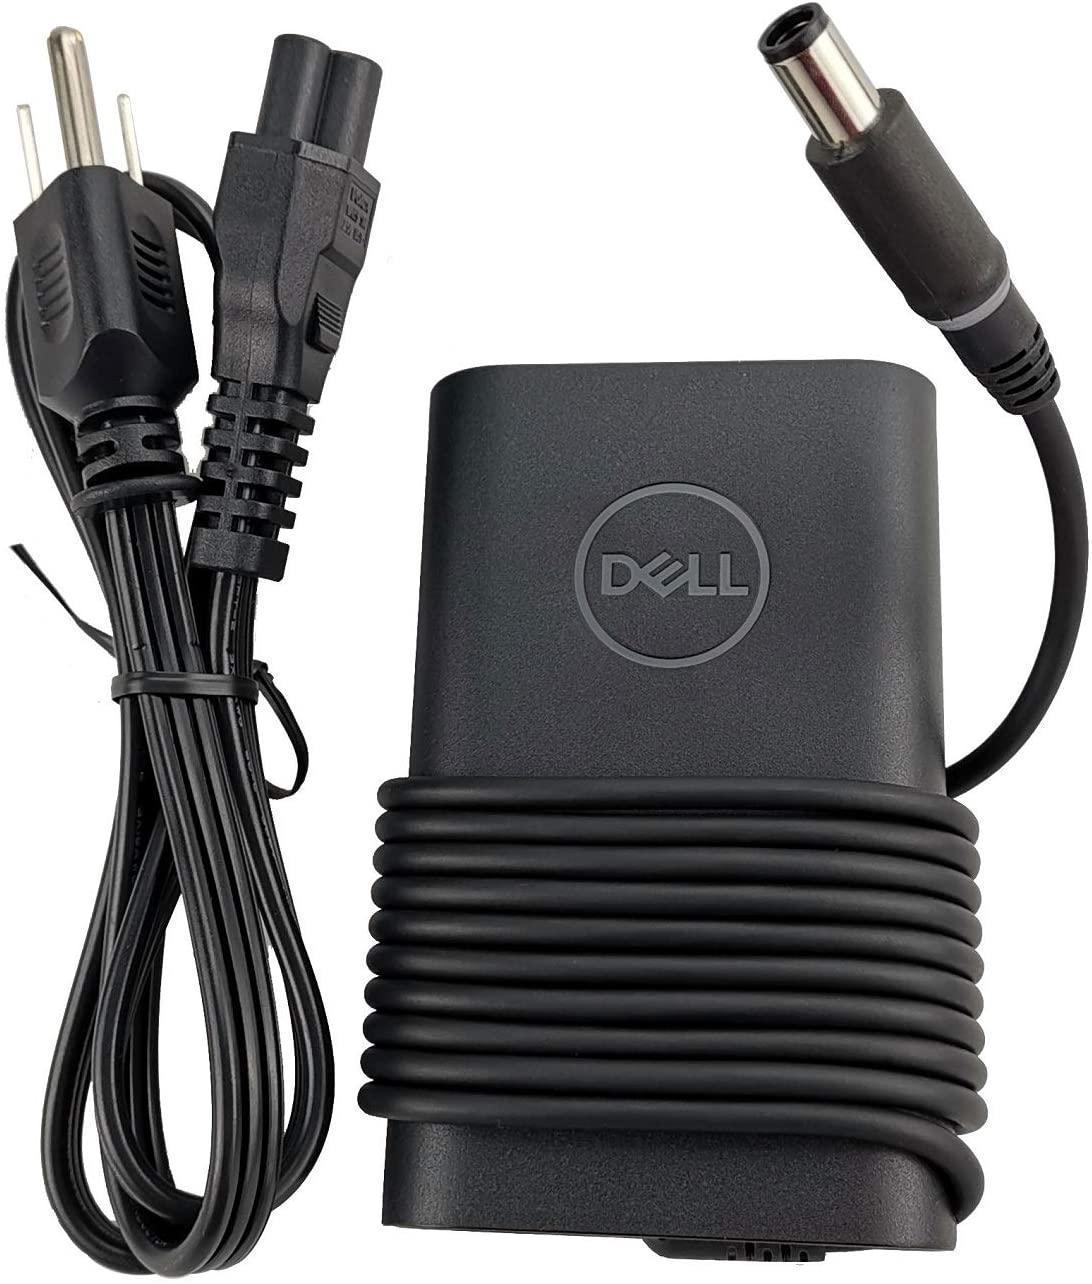 Dell Chargers - Battery Mate